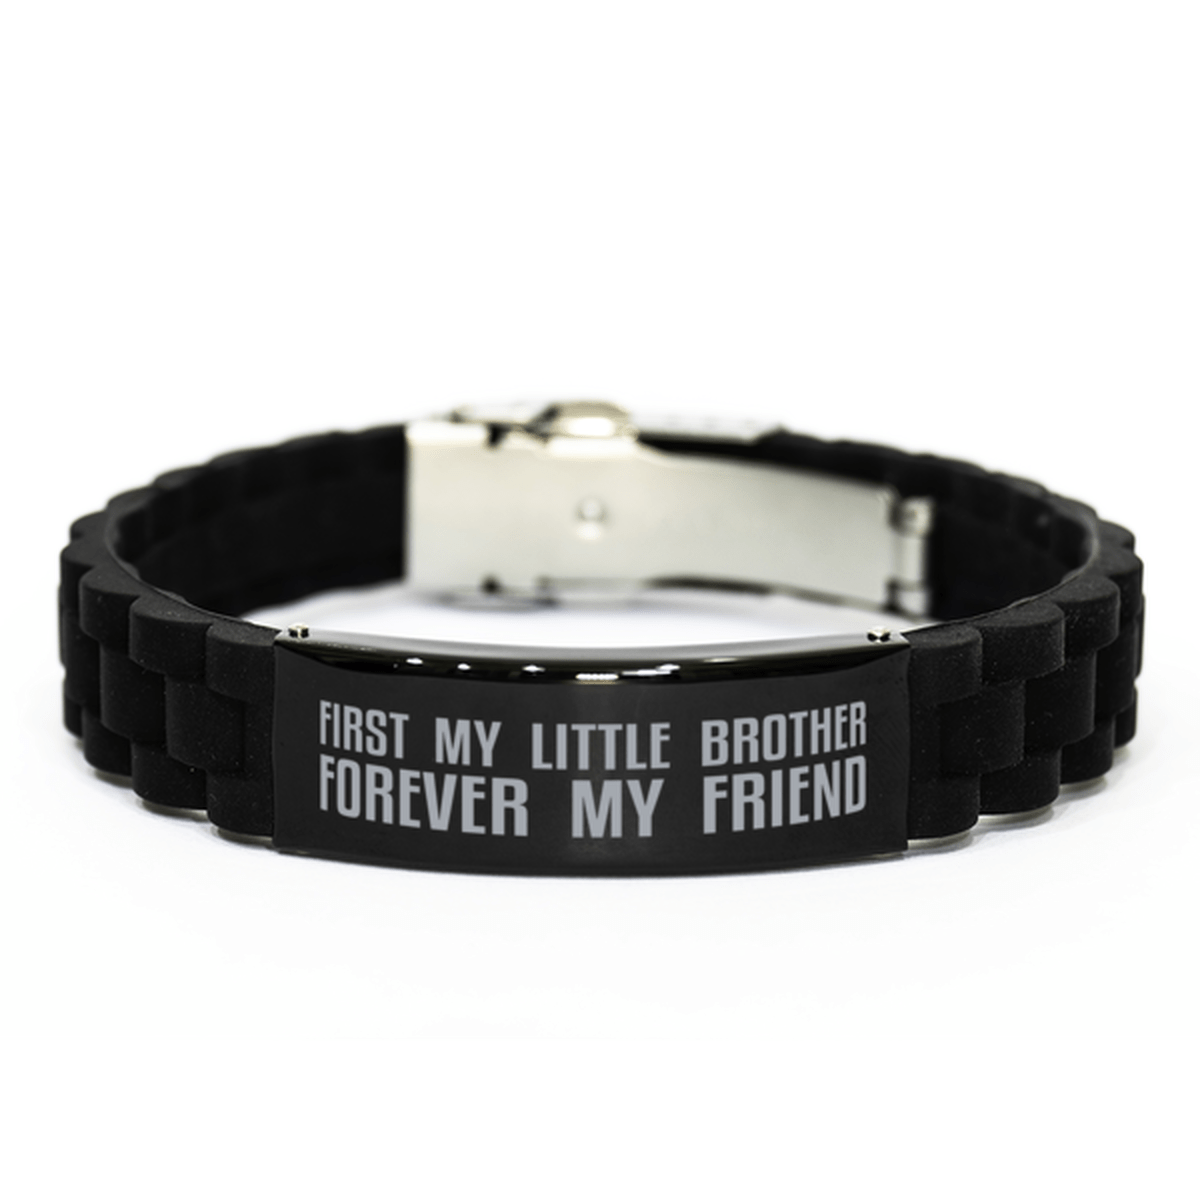 Unique Little Brother Bracelet, First My Little Brother Forever My Friend, Best Gift for Little Brother Birthday, Christmas